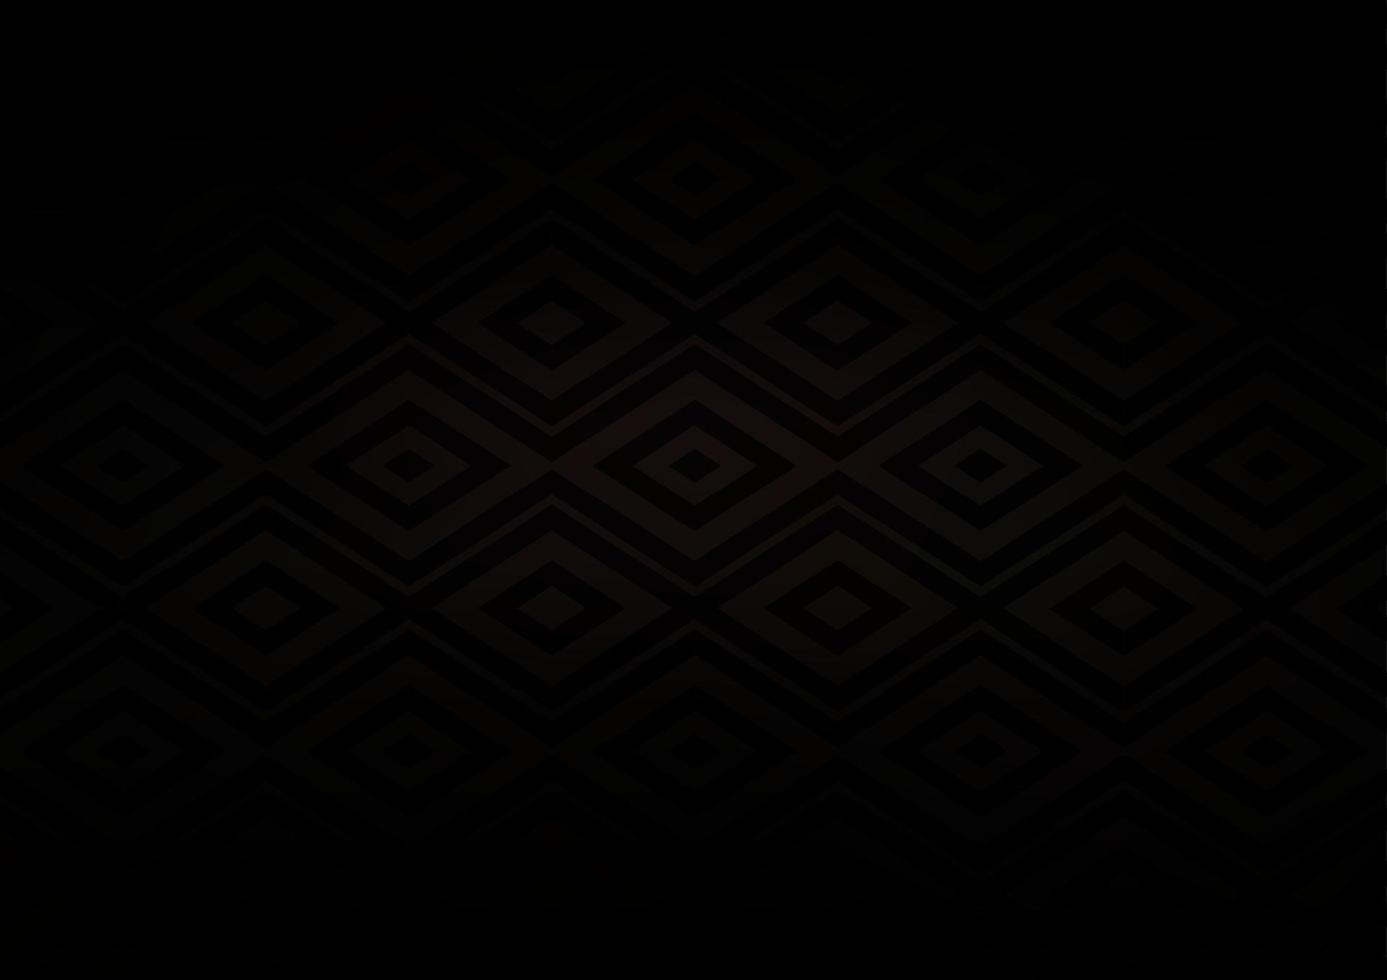 Dark Black vector pattern with lines, rectangles.